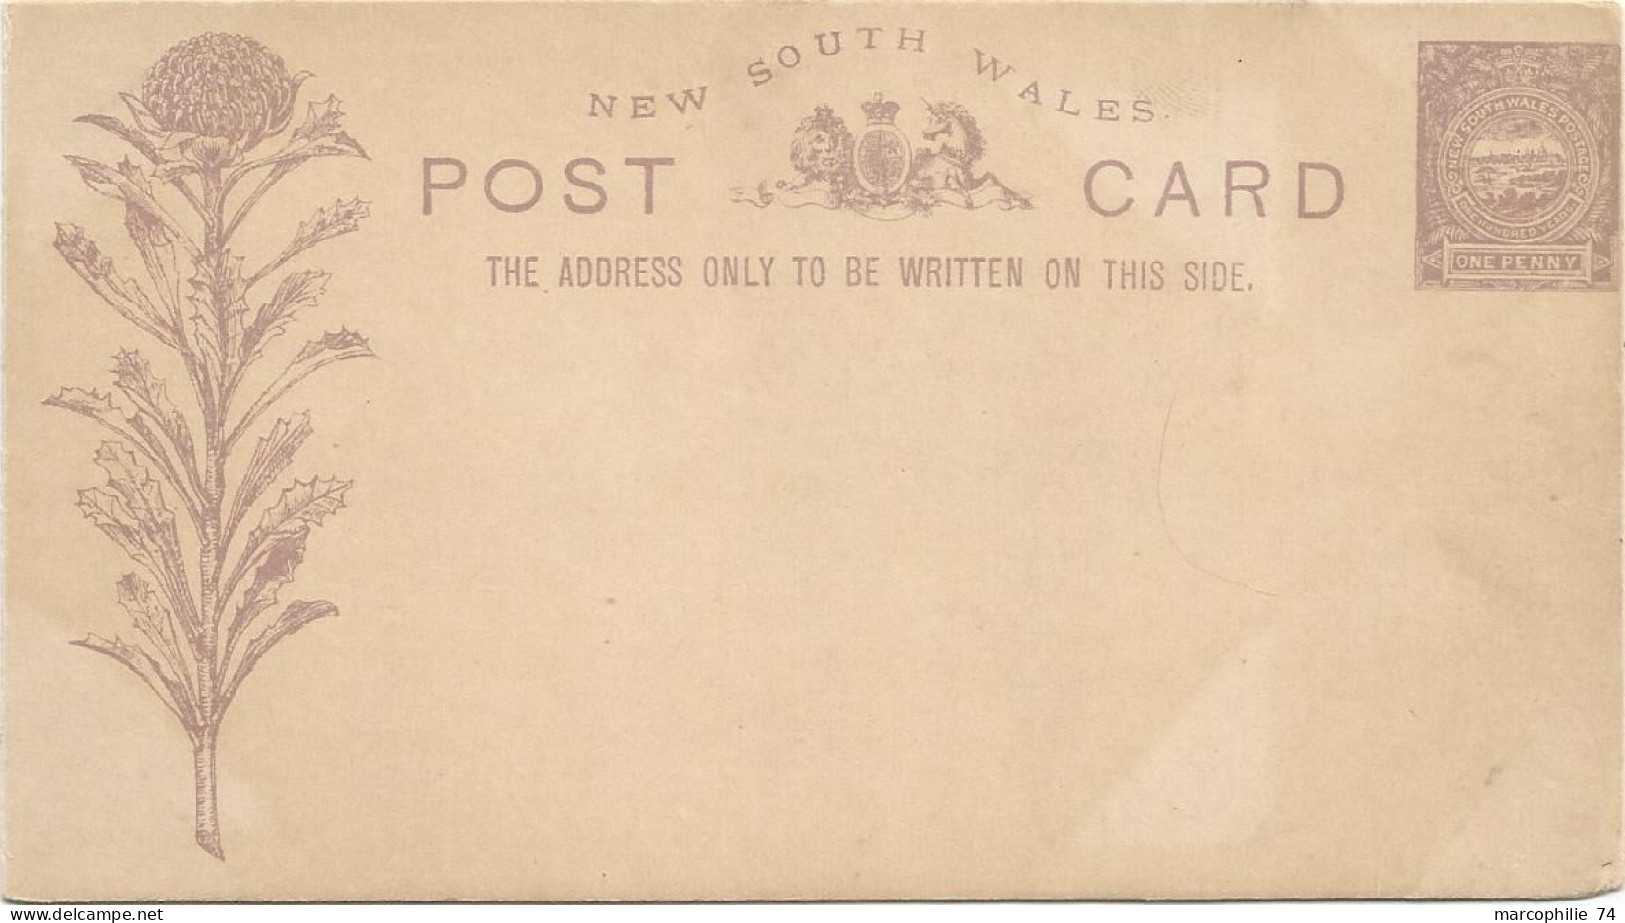 NEW SOUTH WALES ENTIER POST CARD ONE PENNY NEUF - Postal Stationery